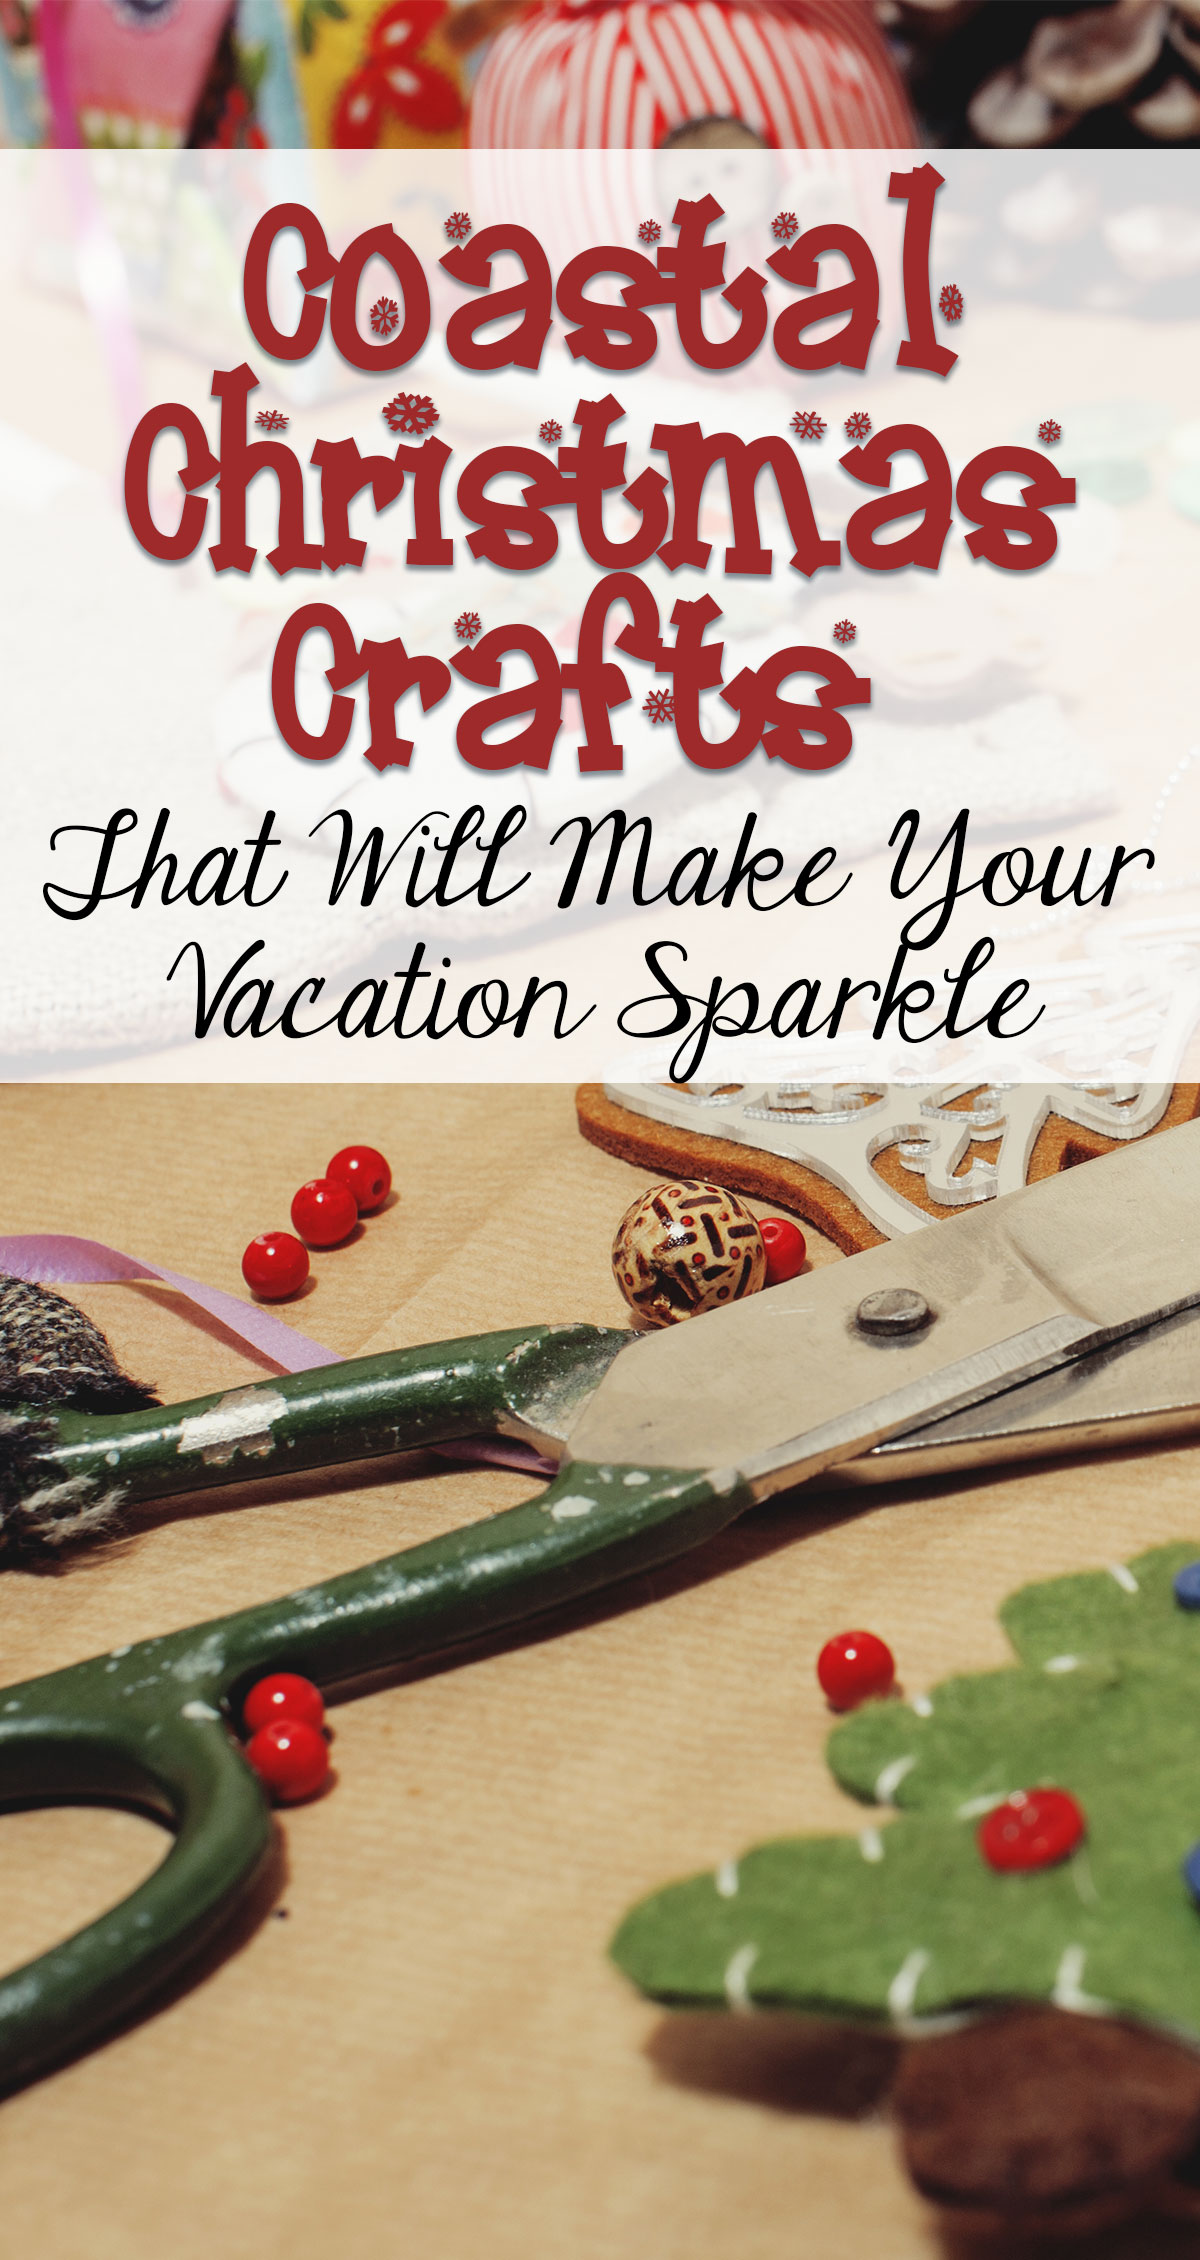 Coastal Christmas Crafts That Will Make Your Vacation Sparkle Pin